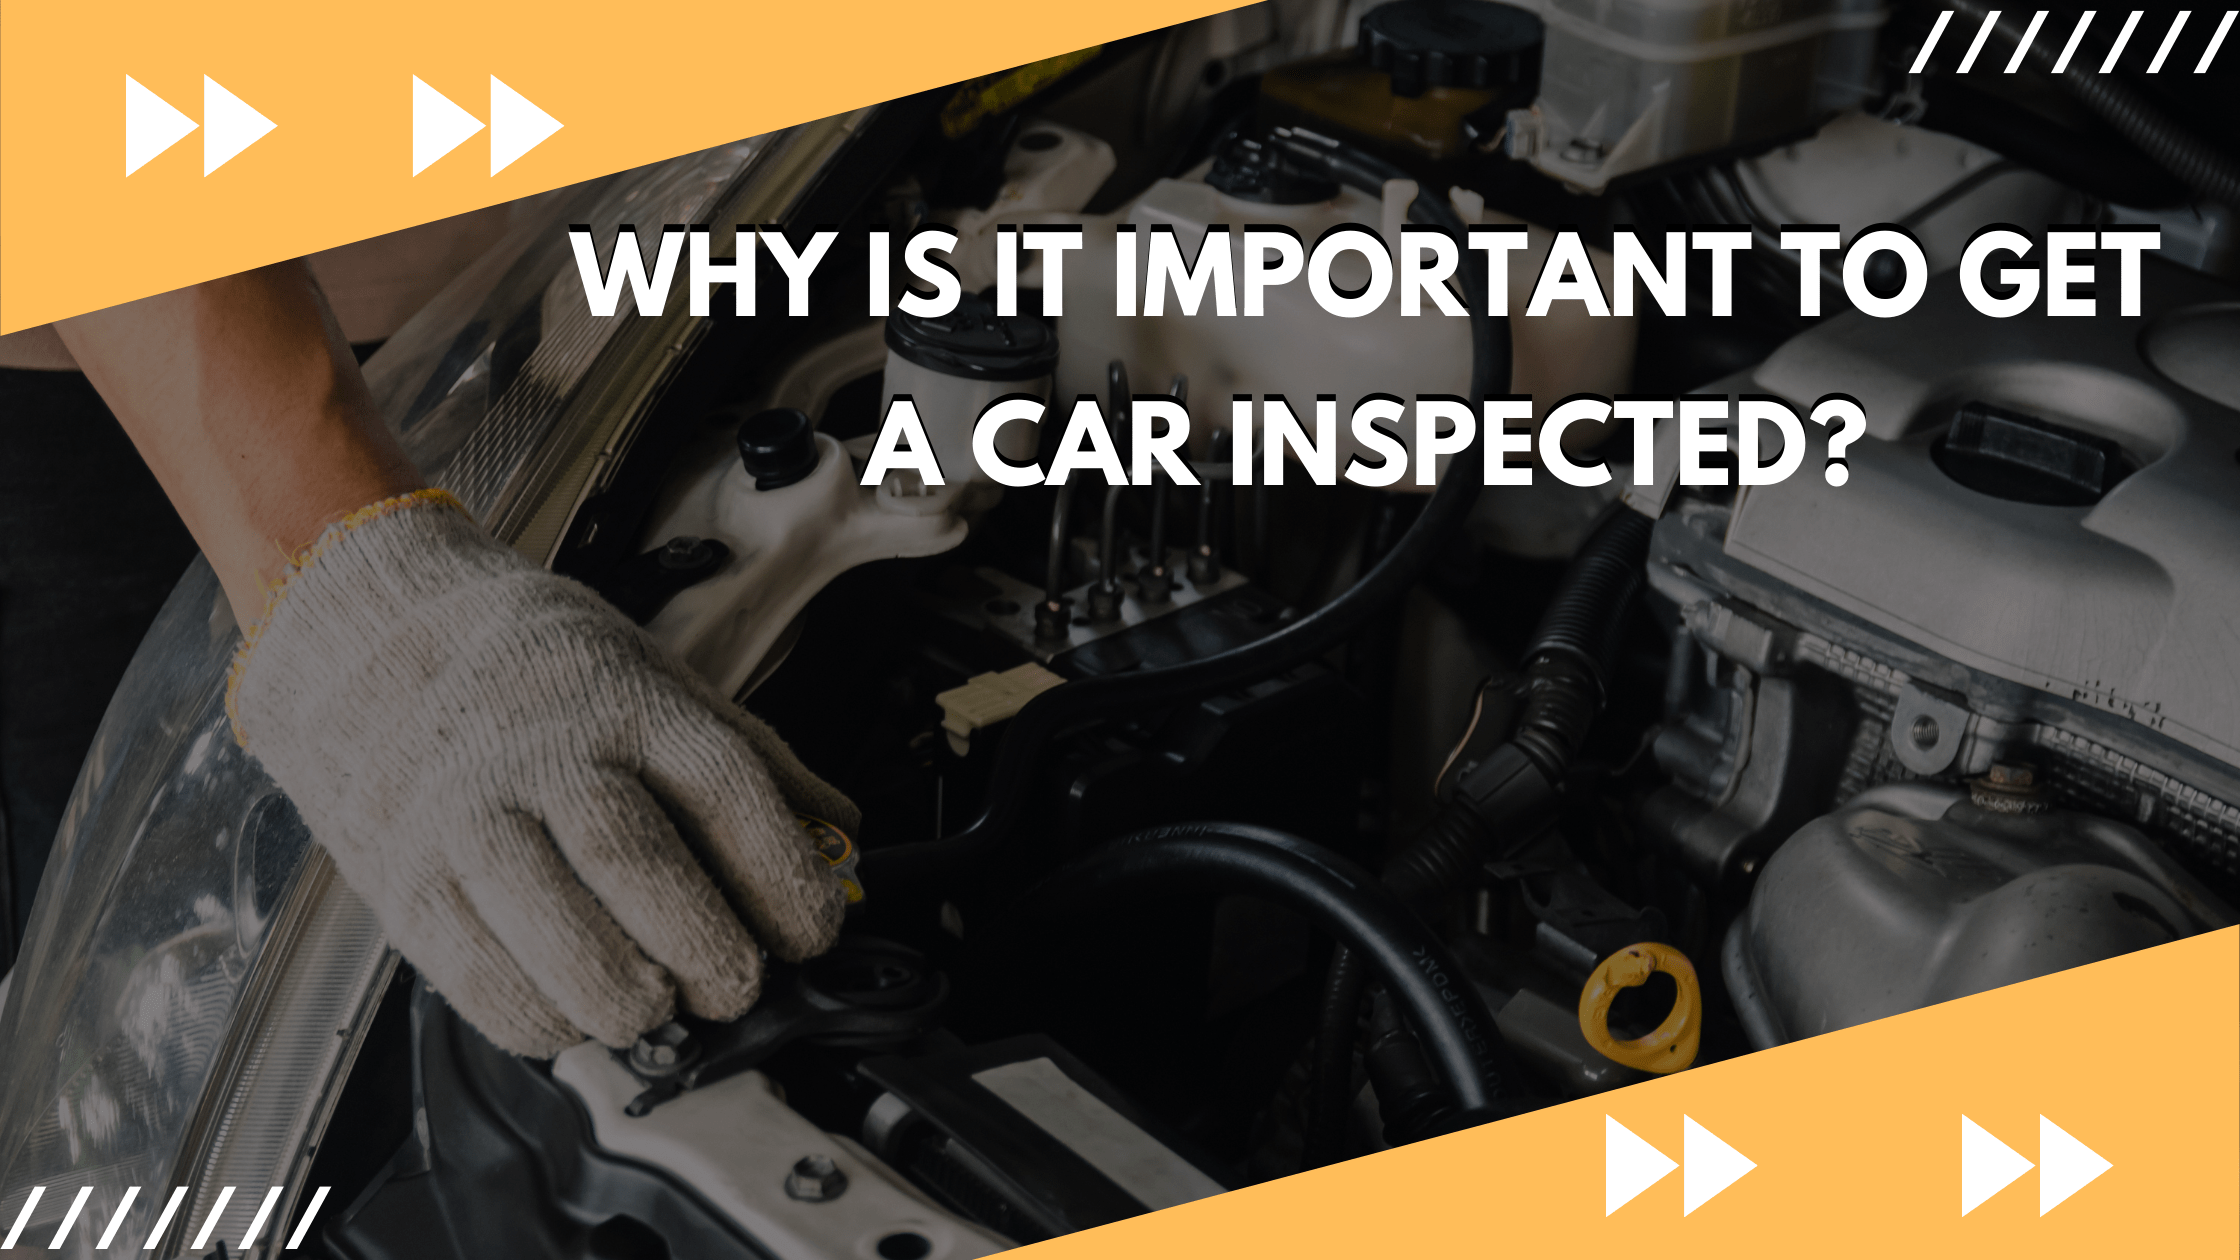 Why Is It Important to Get a Car Inspected?